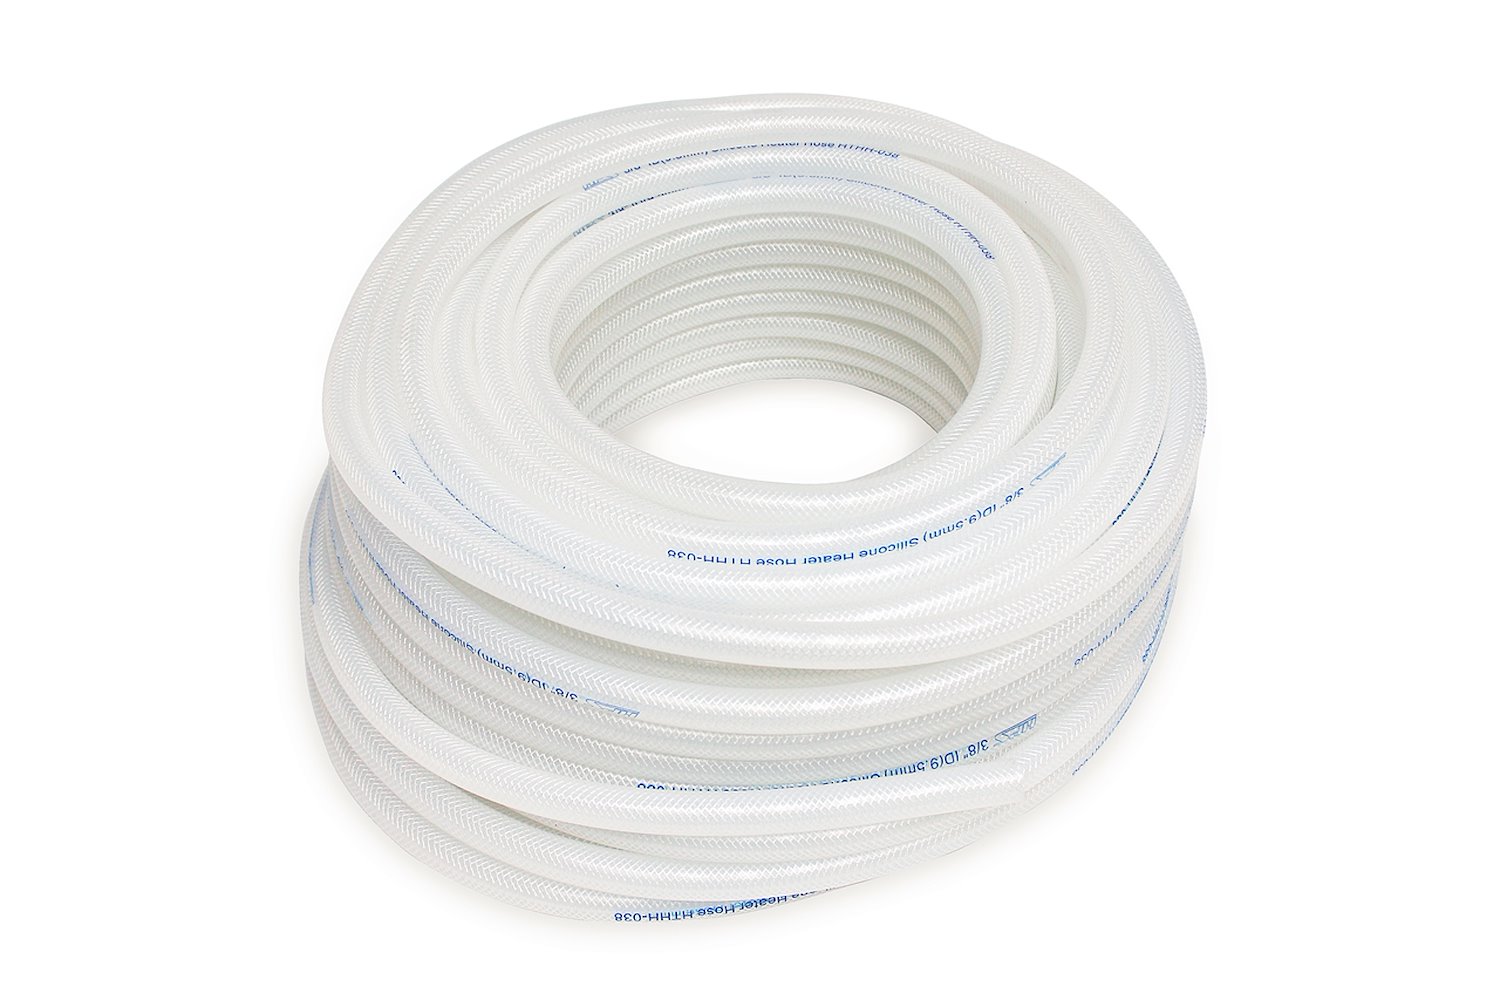 HTHH-016-CLEARx25 Silicone Heater Hose Tubing, High-Temp Reinforced, 5/32 in. ID, 25 ft. Roll, Clear